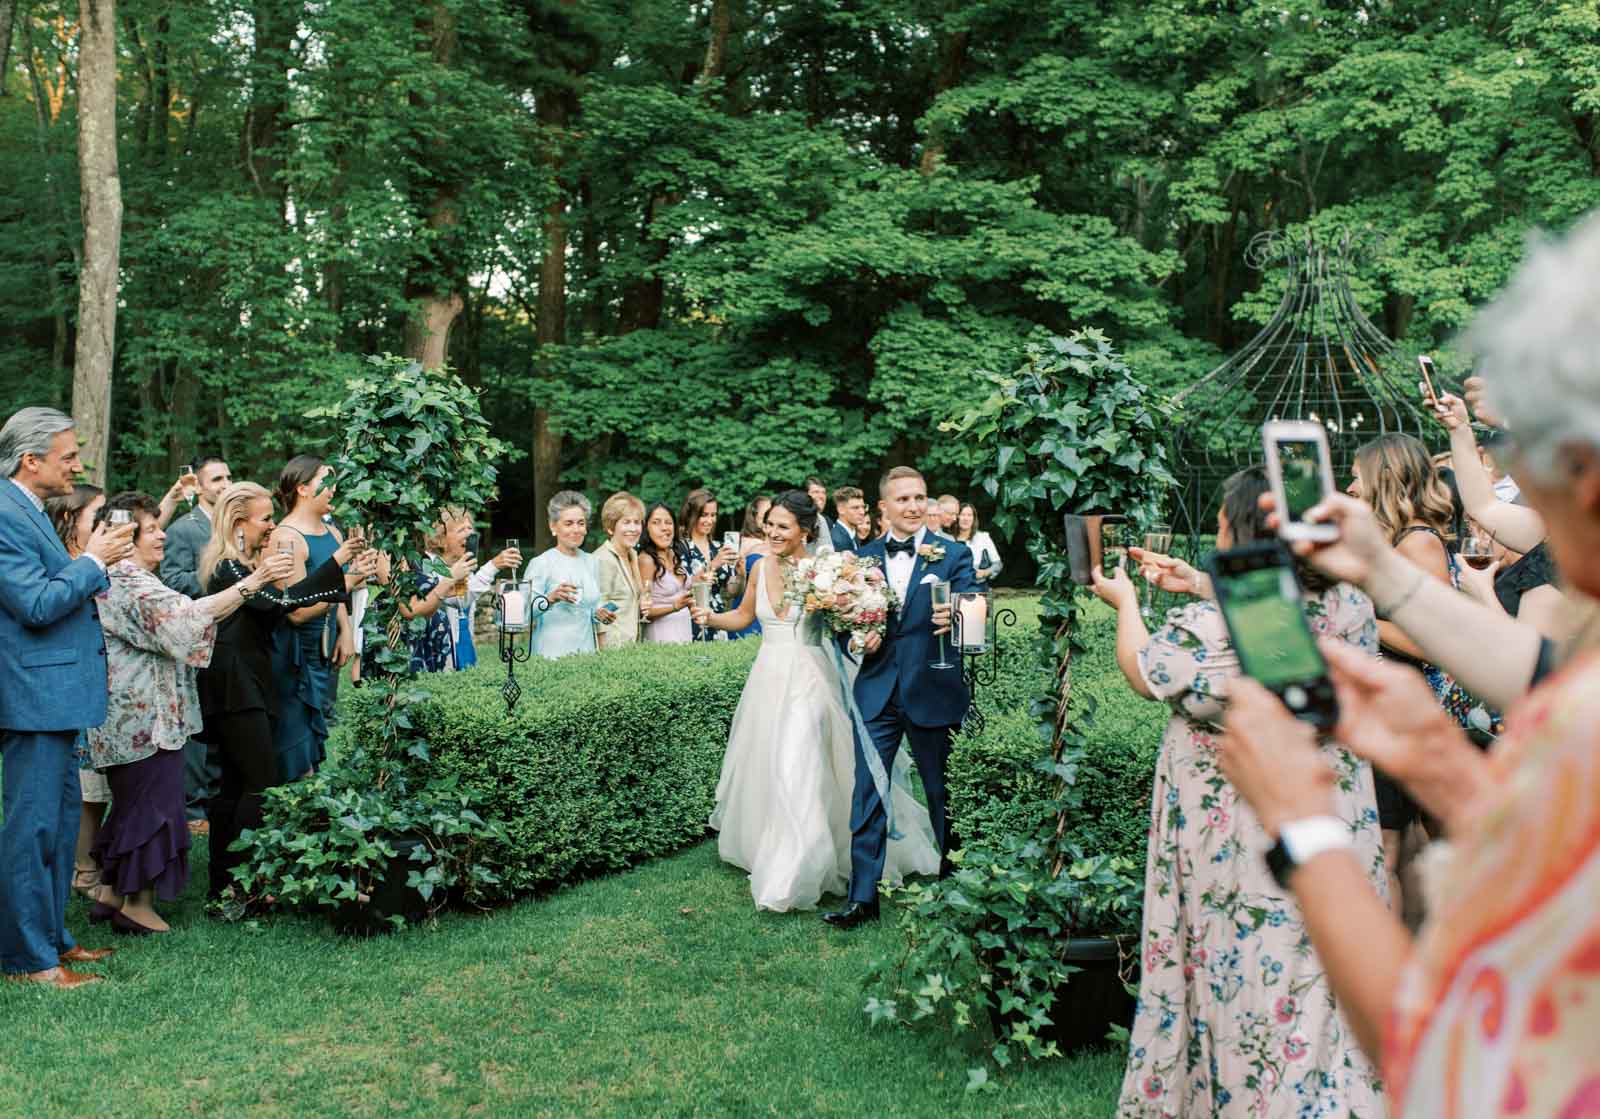 Bride and groom walking out of their wedding ceremony in Vermont with their wedding guests applauding and taking photos of them